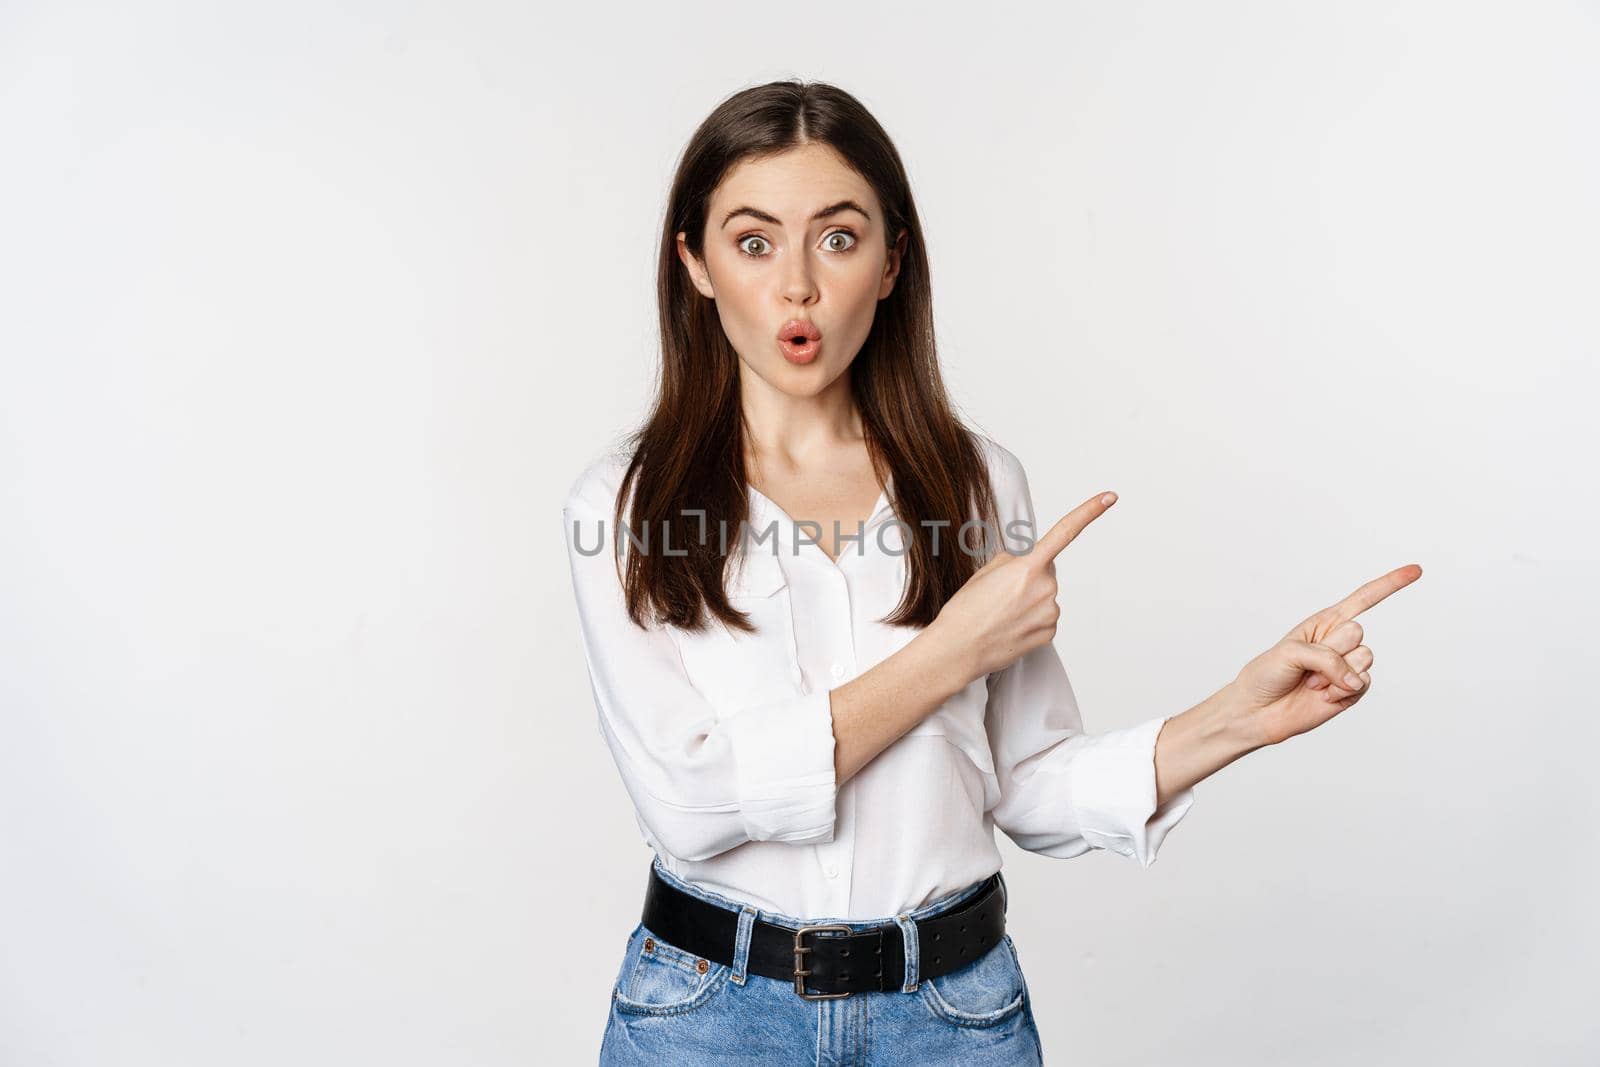 Amazed young woman pointing fingers down, showing announcement or logo banner, looking surprised and intrigued, standing over white background.